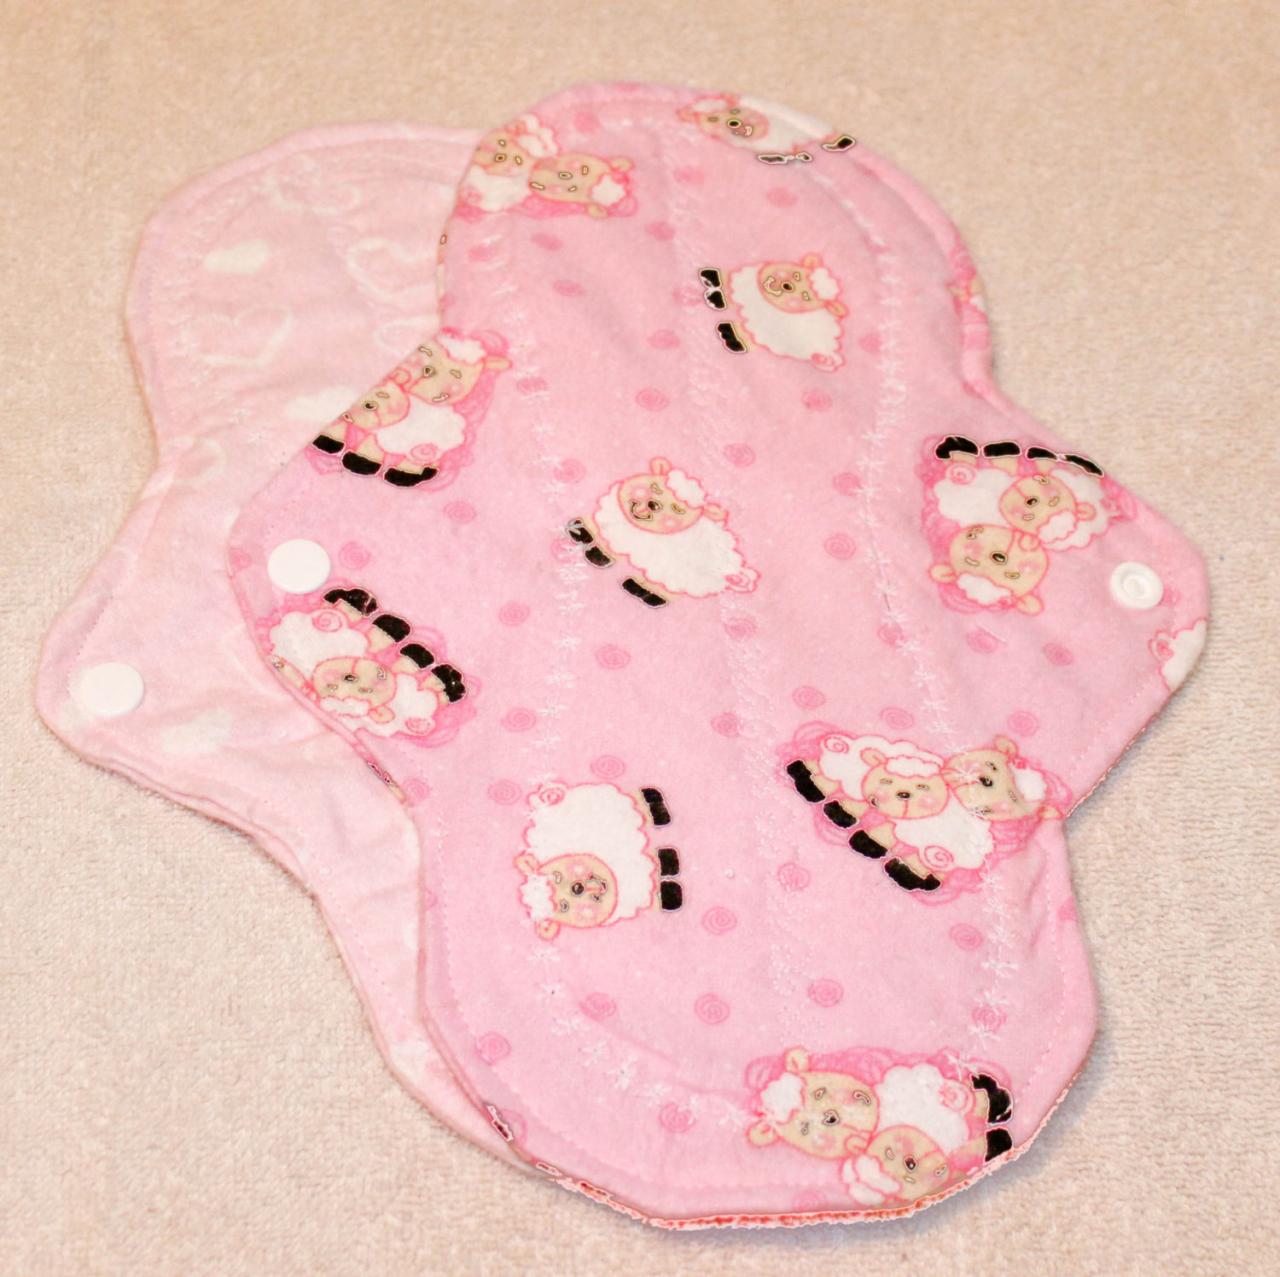 Two, 10 Inch Washable Menstrual Pads Choose Your Print